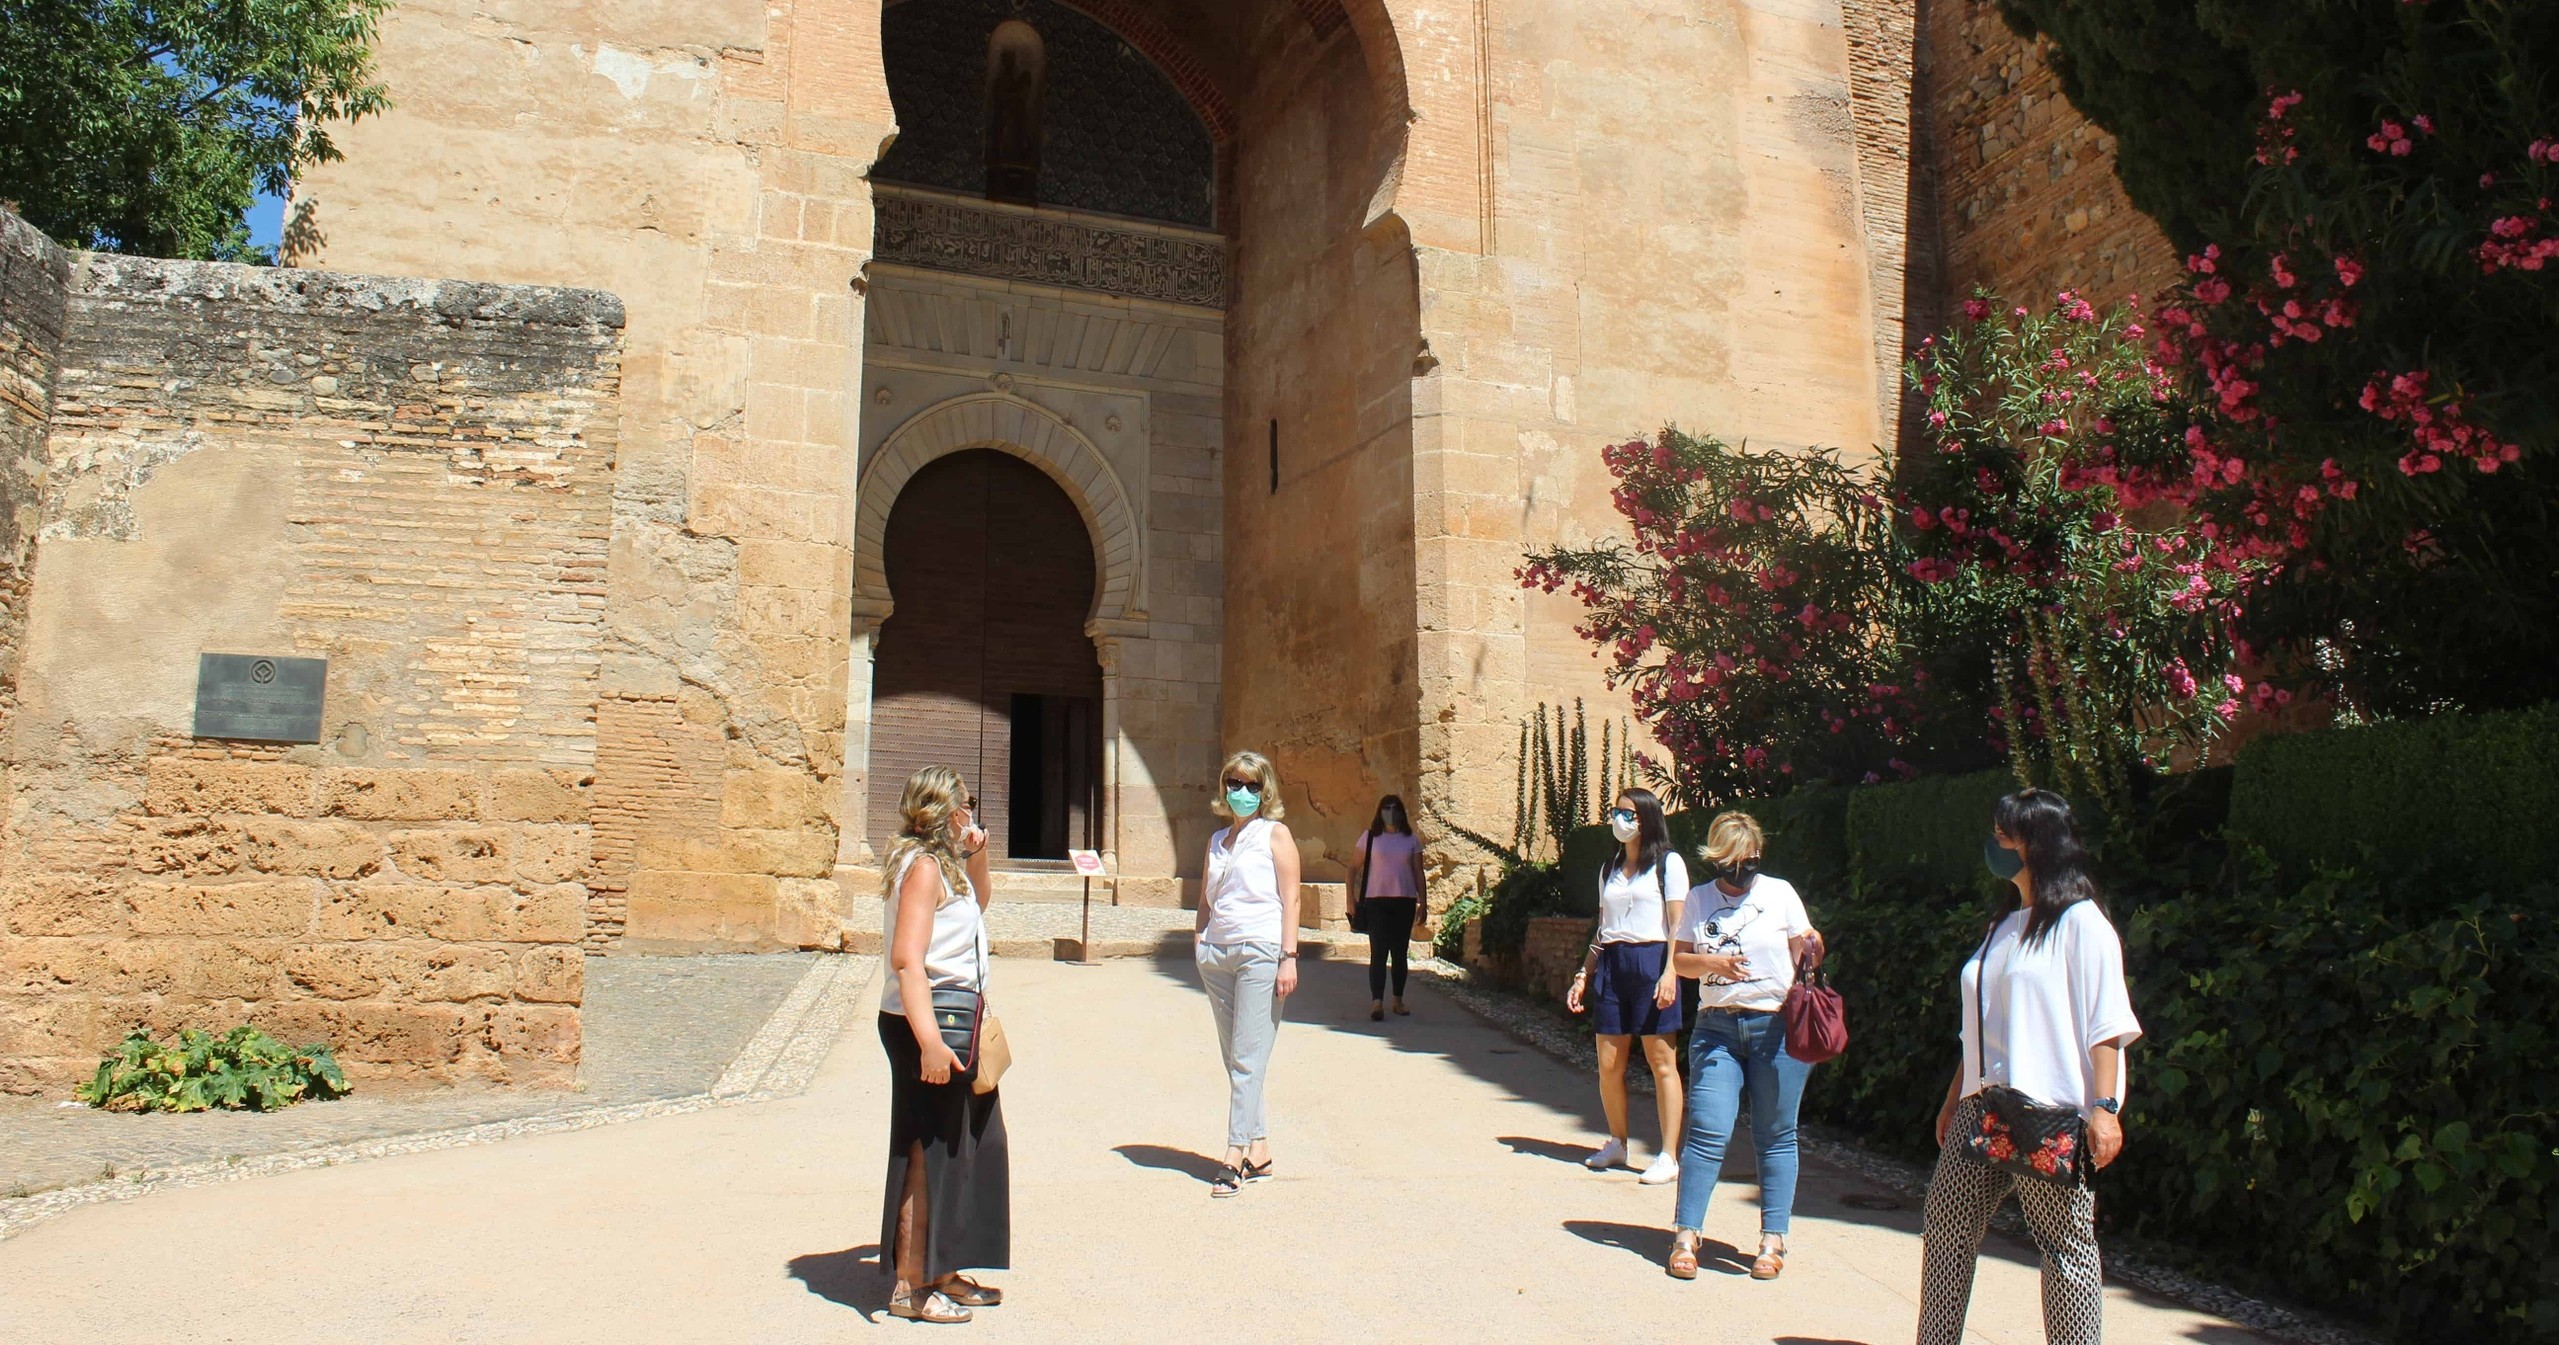 Official Guide to the Alhambra - Accommodations in Granada